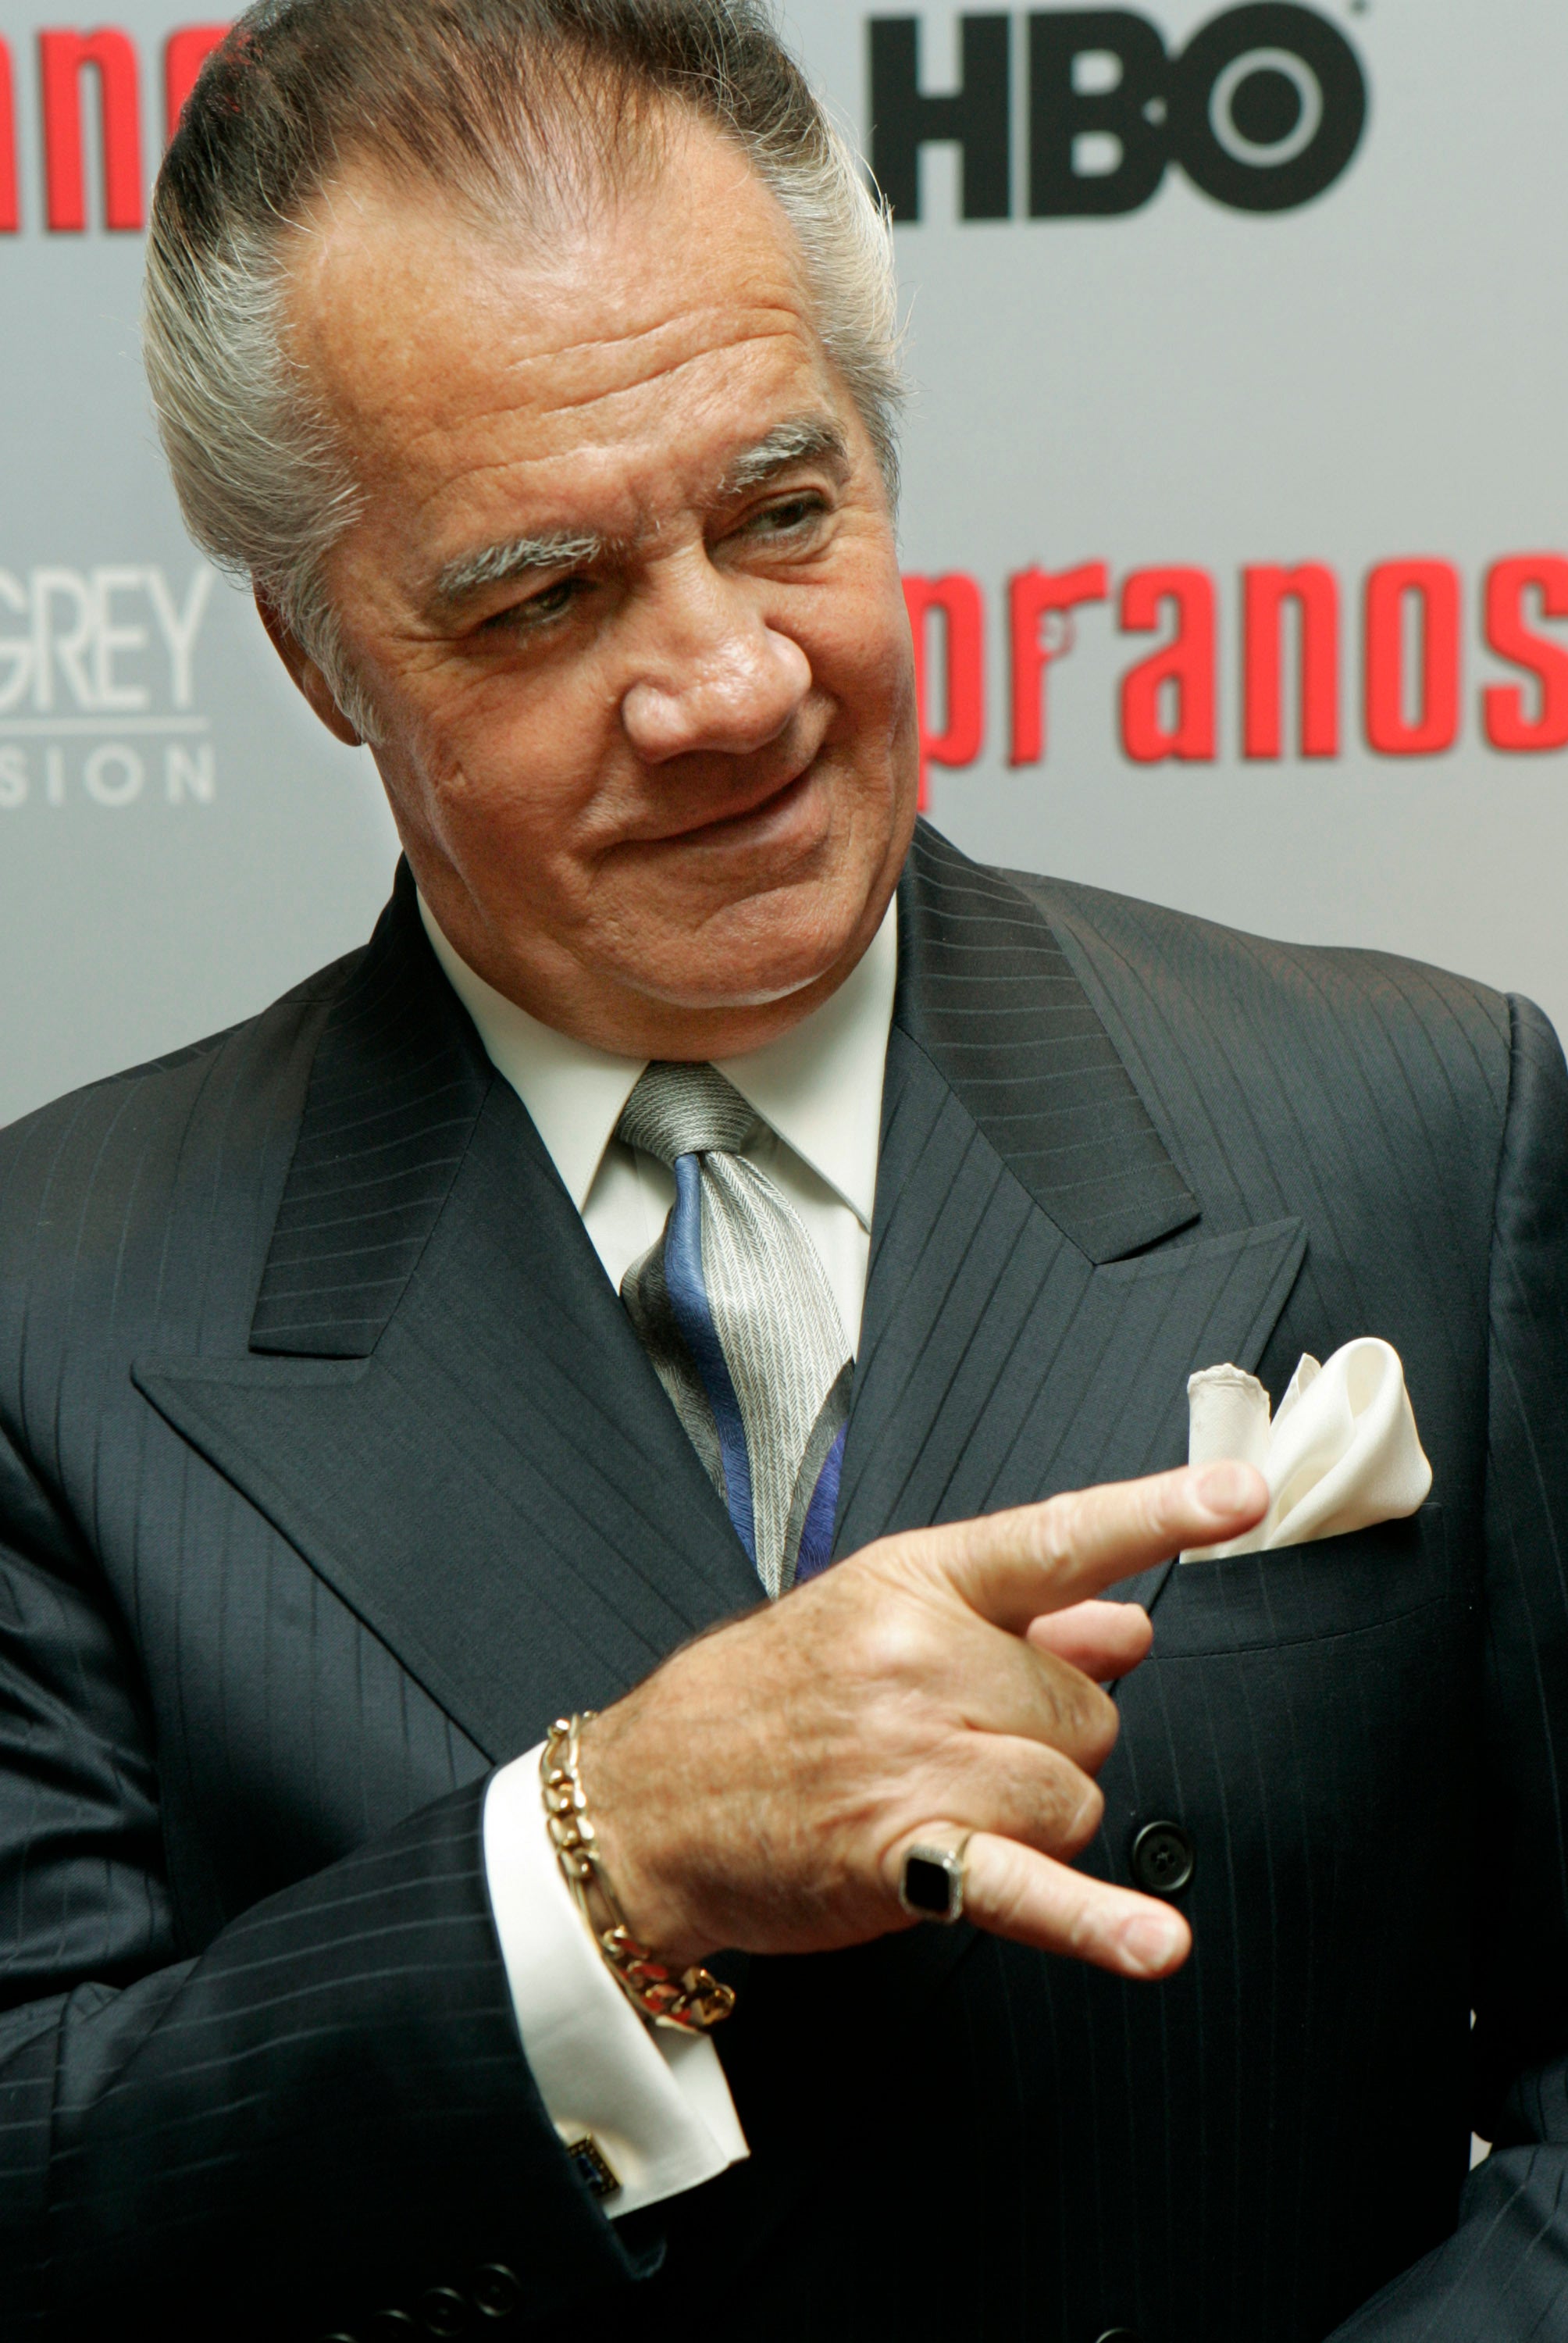 Tony Sirico was best known for his role in The Sopranos